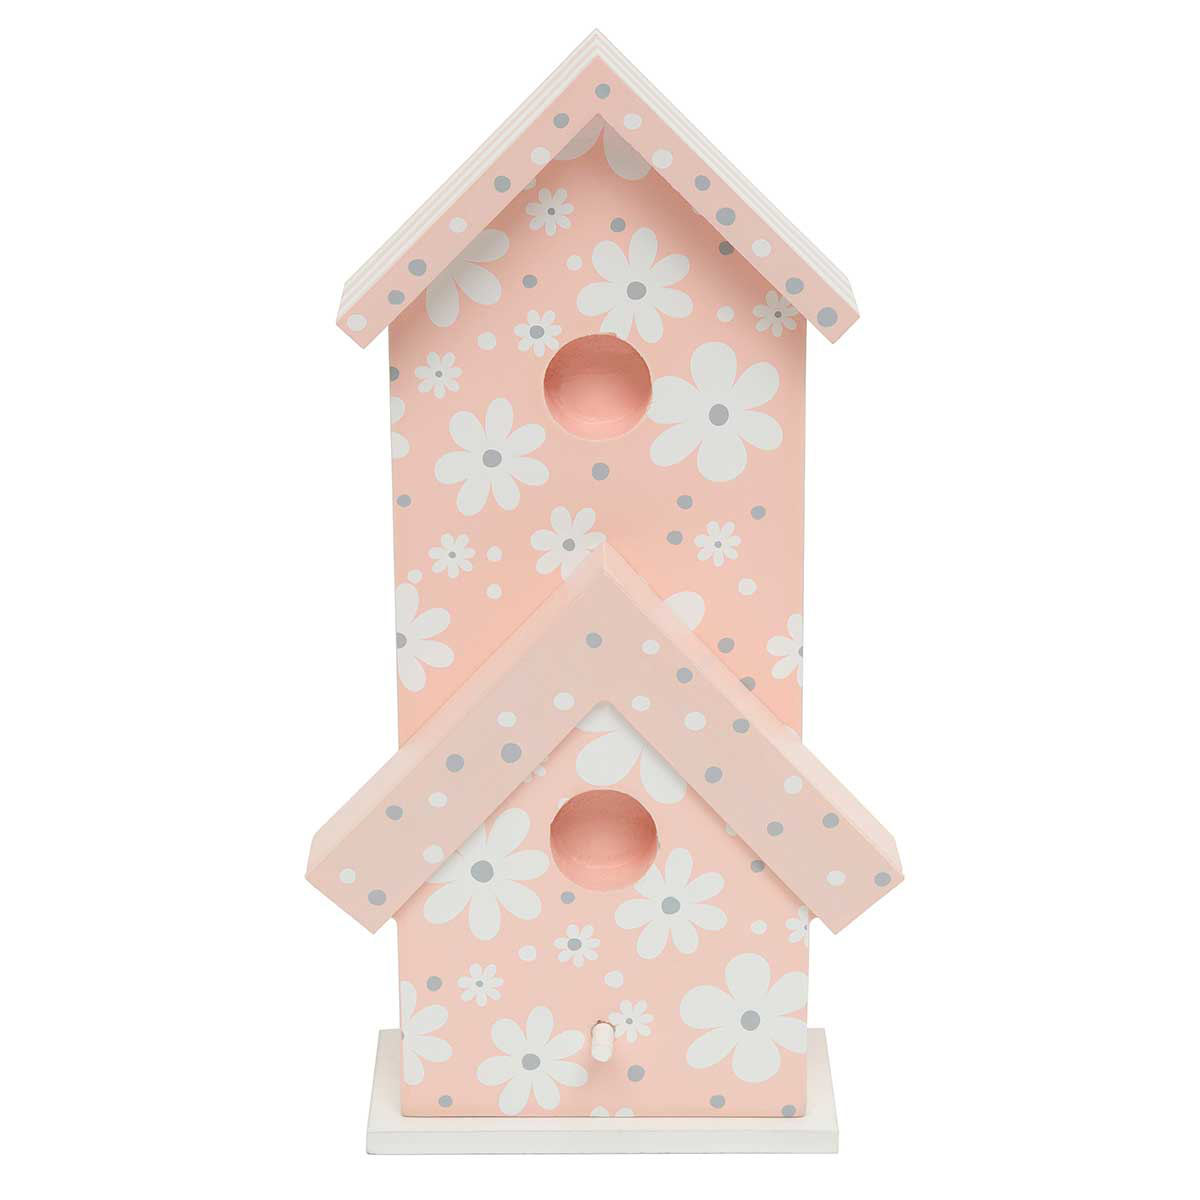 WHOOPSIE WOOD BIRDHOUSE CONDO SIT-A-BOUT PINK/WHITE